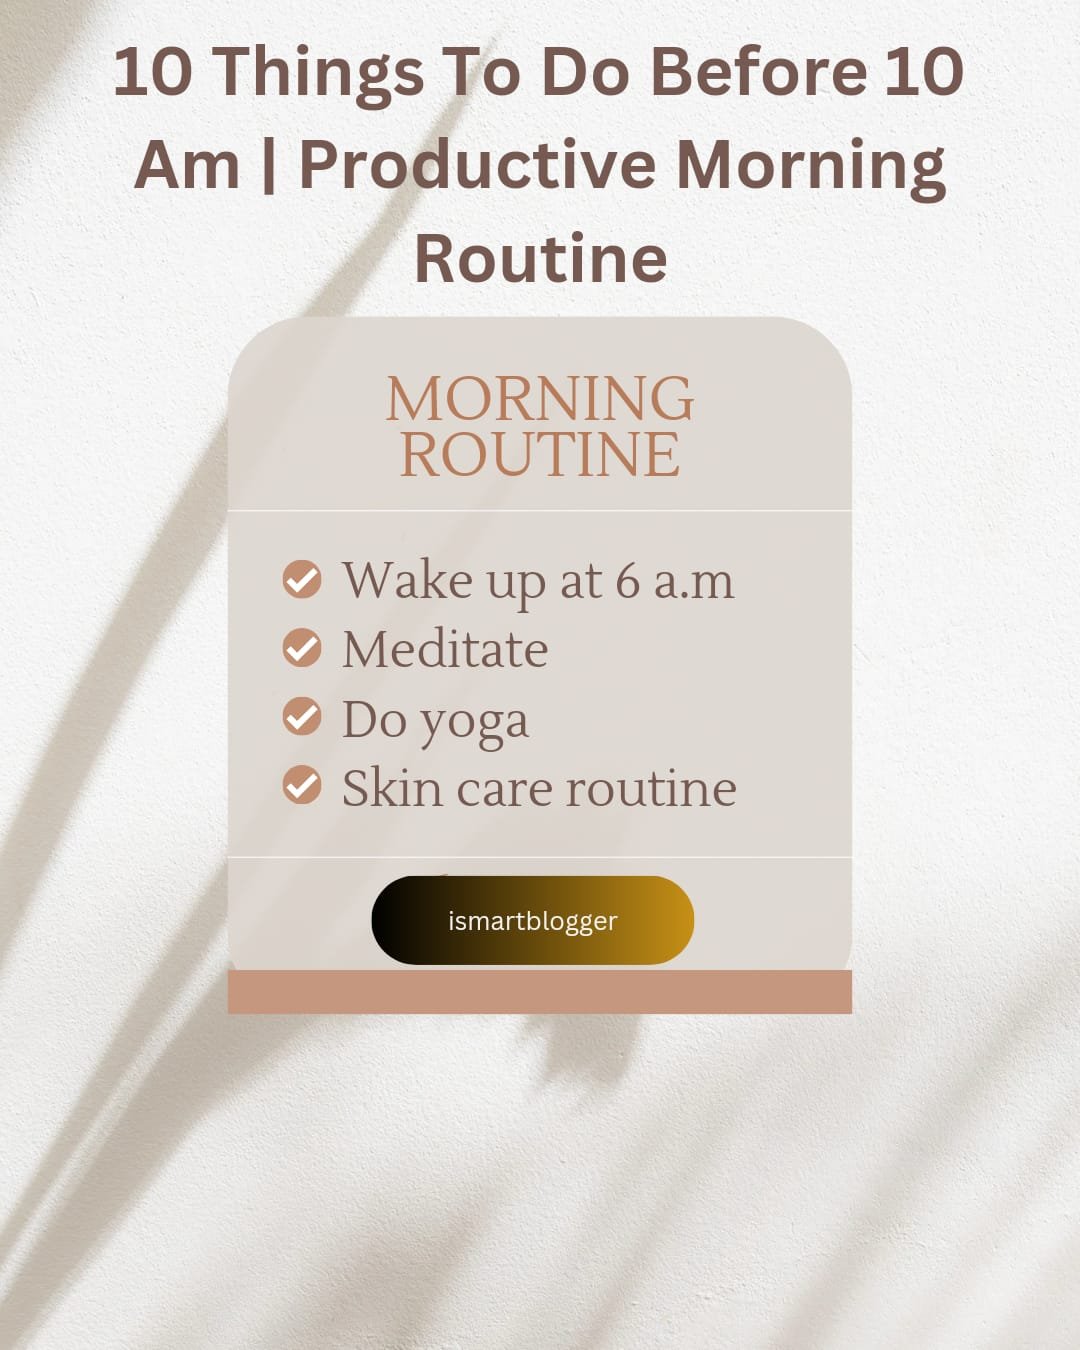 10 things to do before 10 am Productive Morning Routine